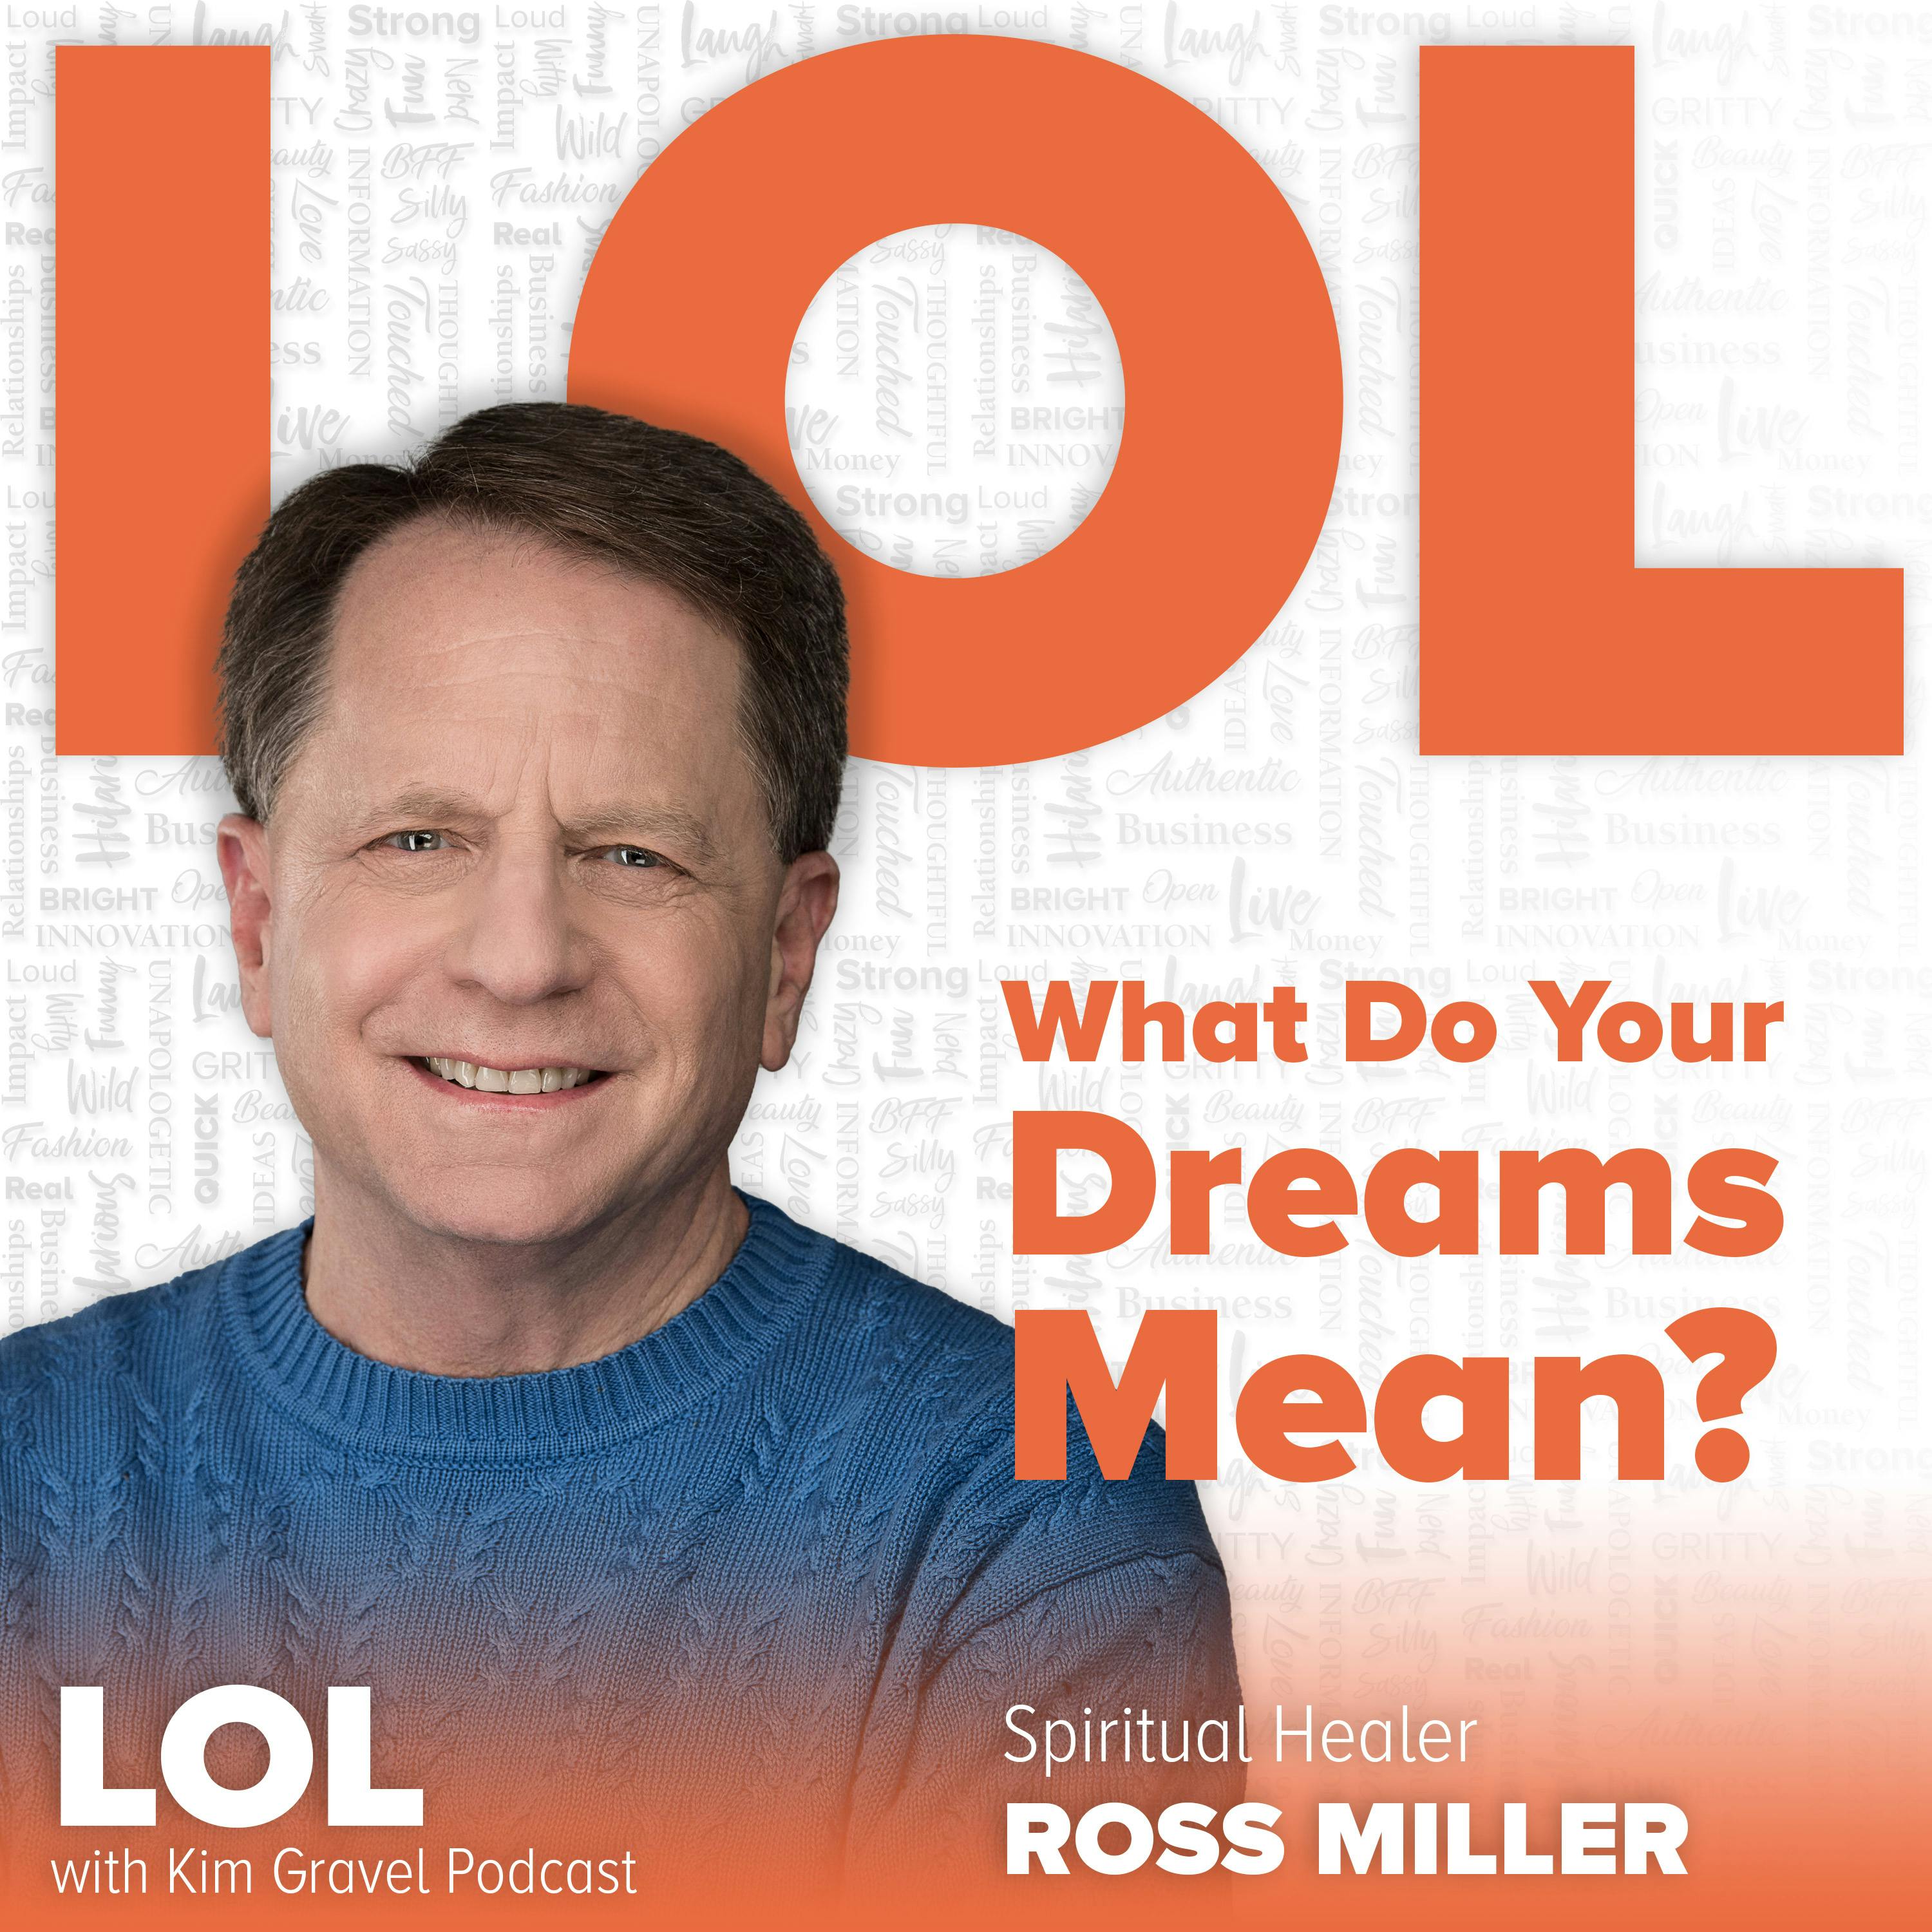 What Do Your Dreams Mean? with Spiritual Healer Ross Miller